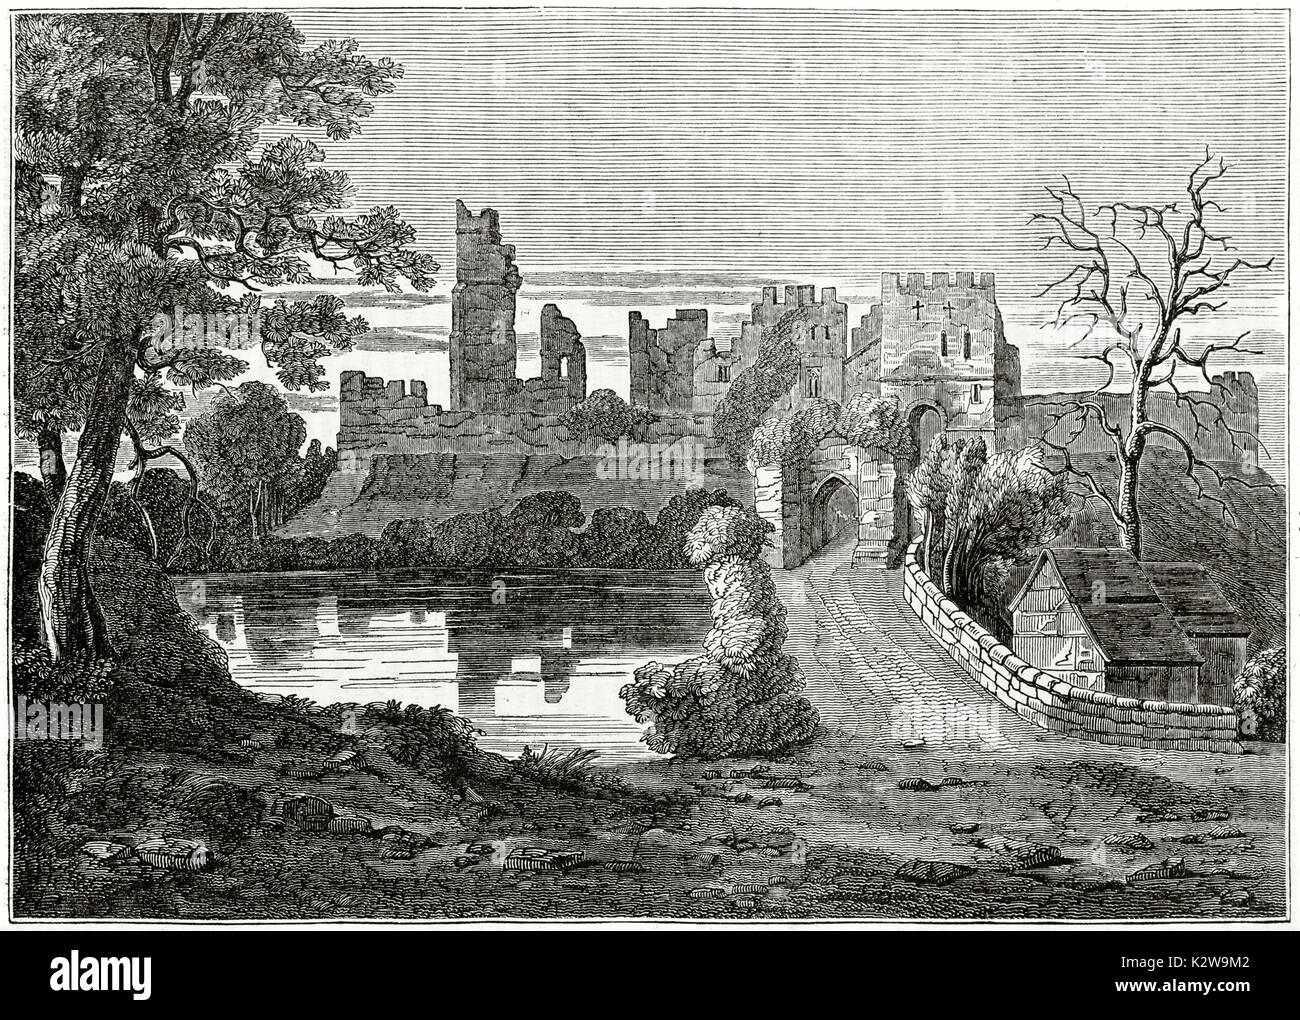 Old view of Prudhoe castle ruins, England. By unidentified author, published on the Penny Magazine, London, 1835 Stock Photo